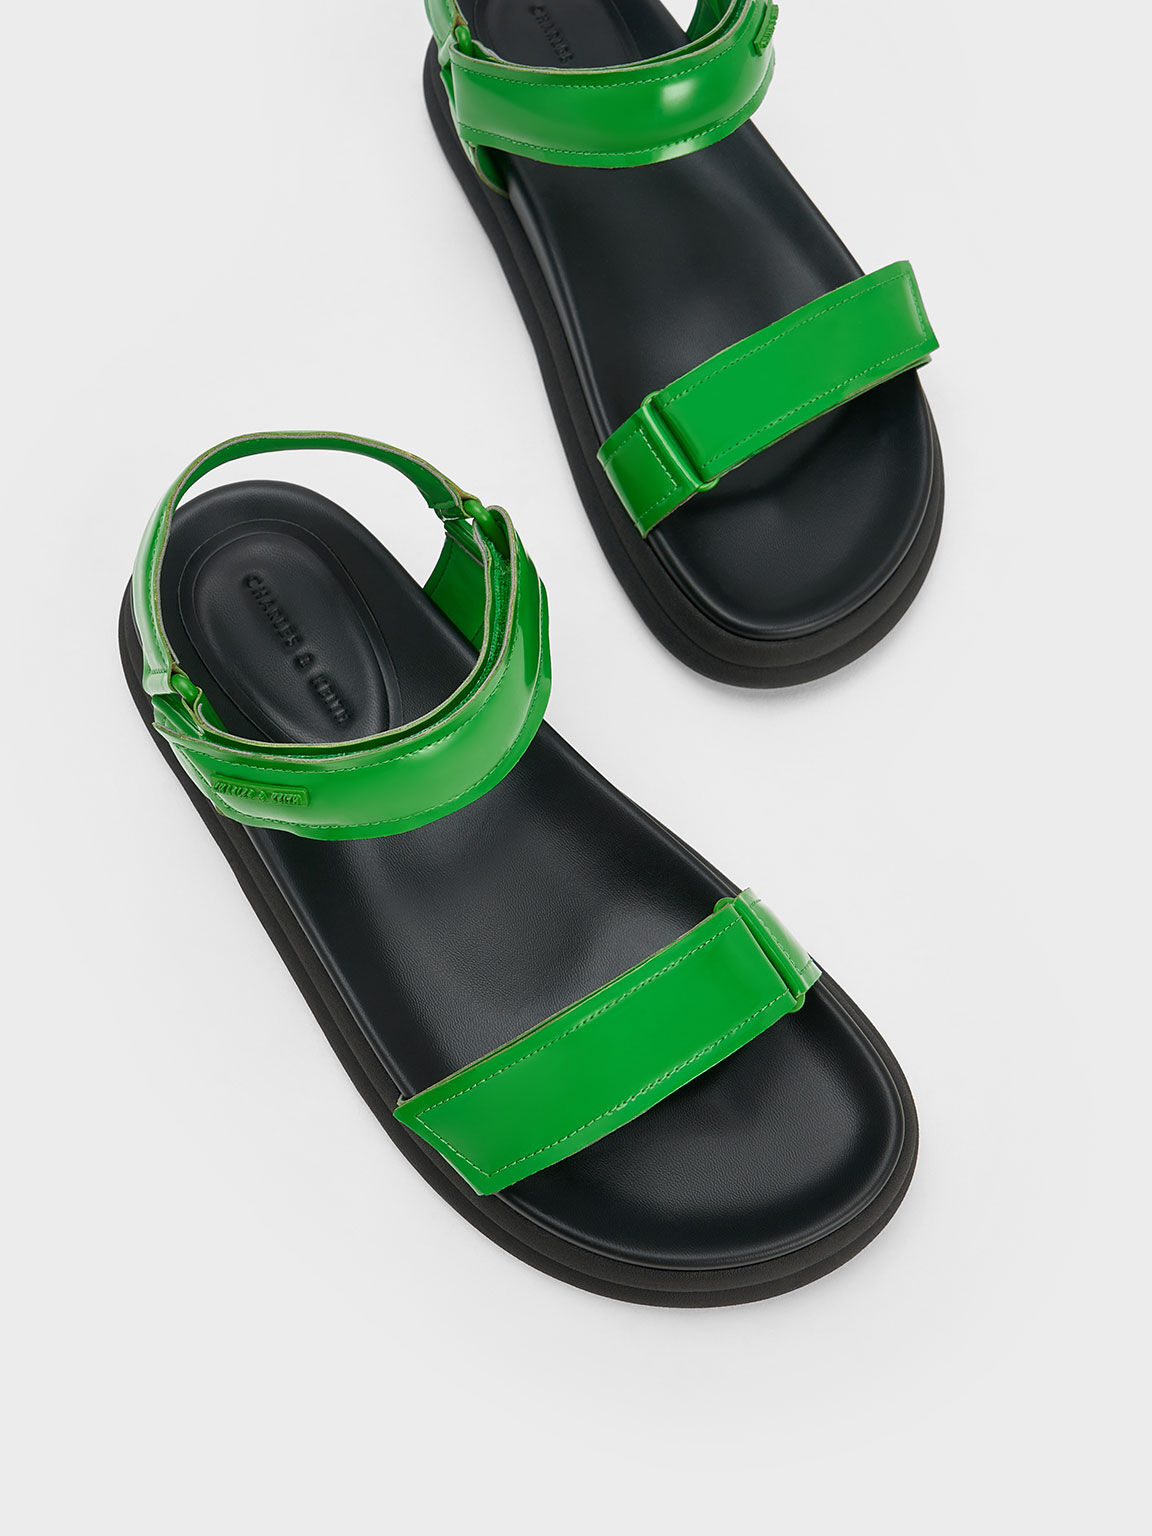 Maise Patent Strappy Sports Sandals, Green, hi-res